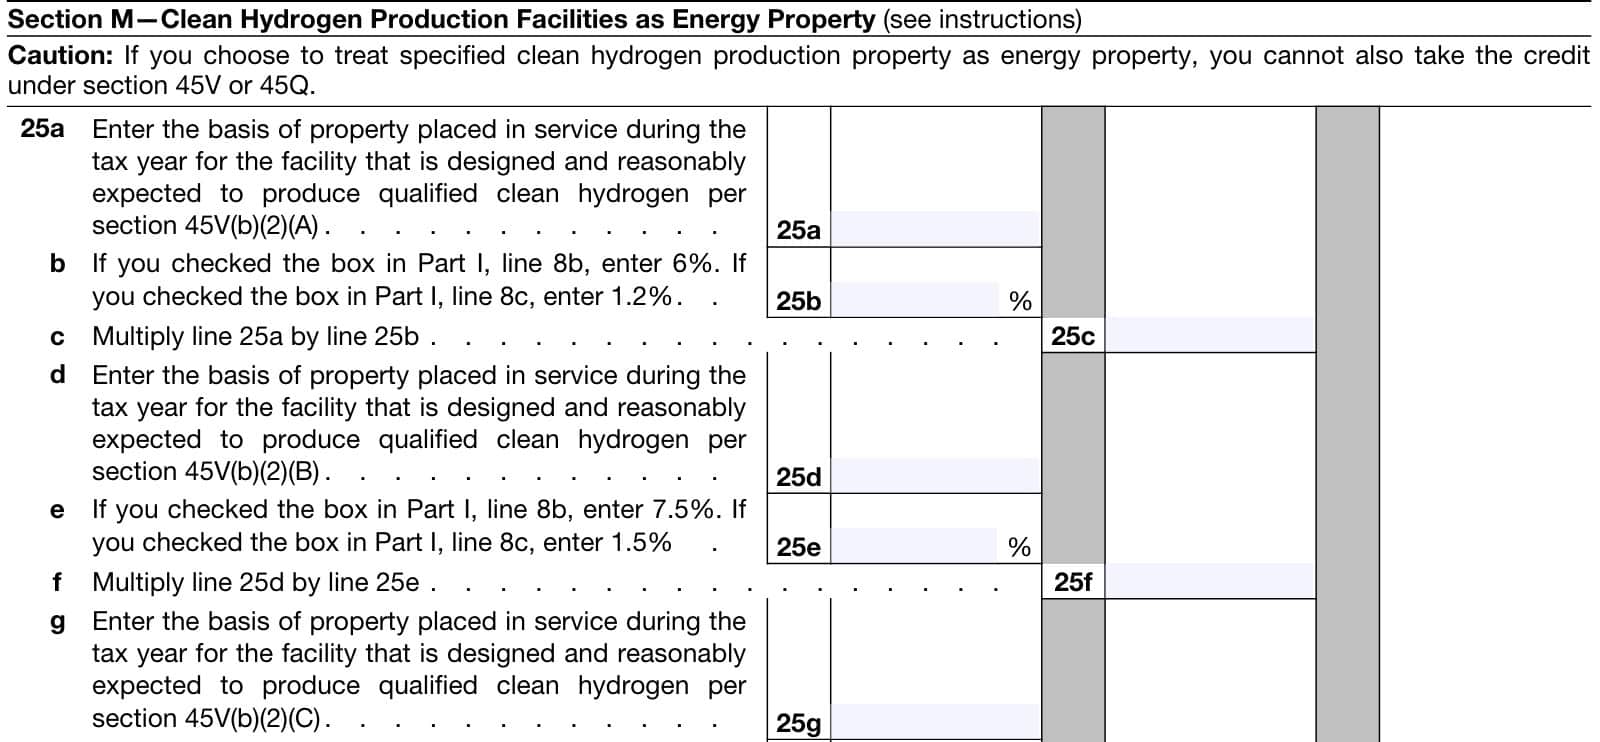 irs form 3468, part vi, section m: clean hydrogen production facilities as energy property